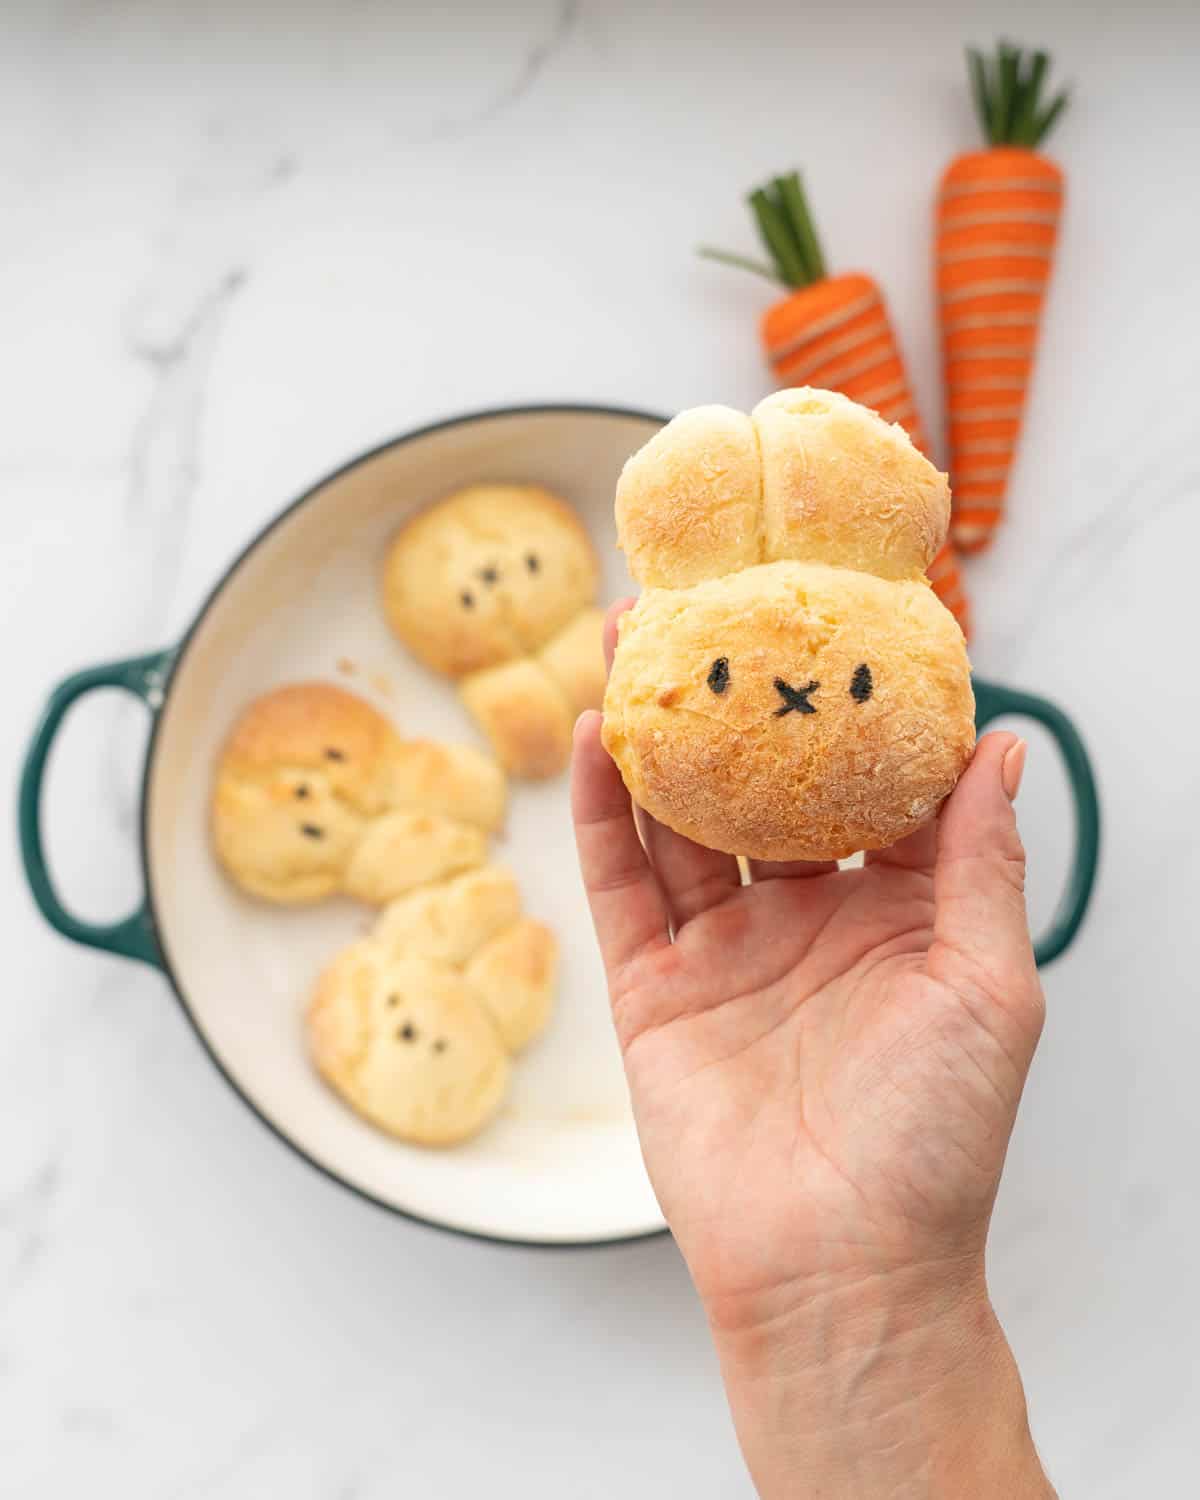 A gluten free dinner roll baked into the shape of a bunny face with 2 ears.